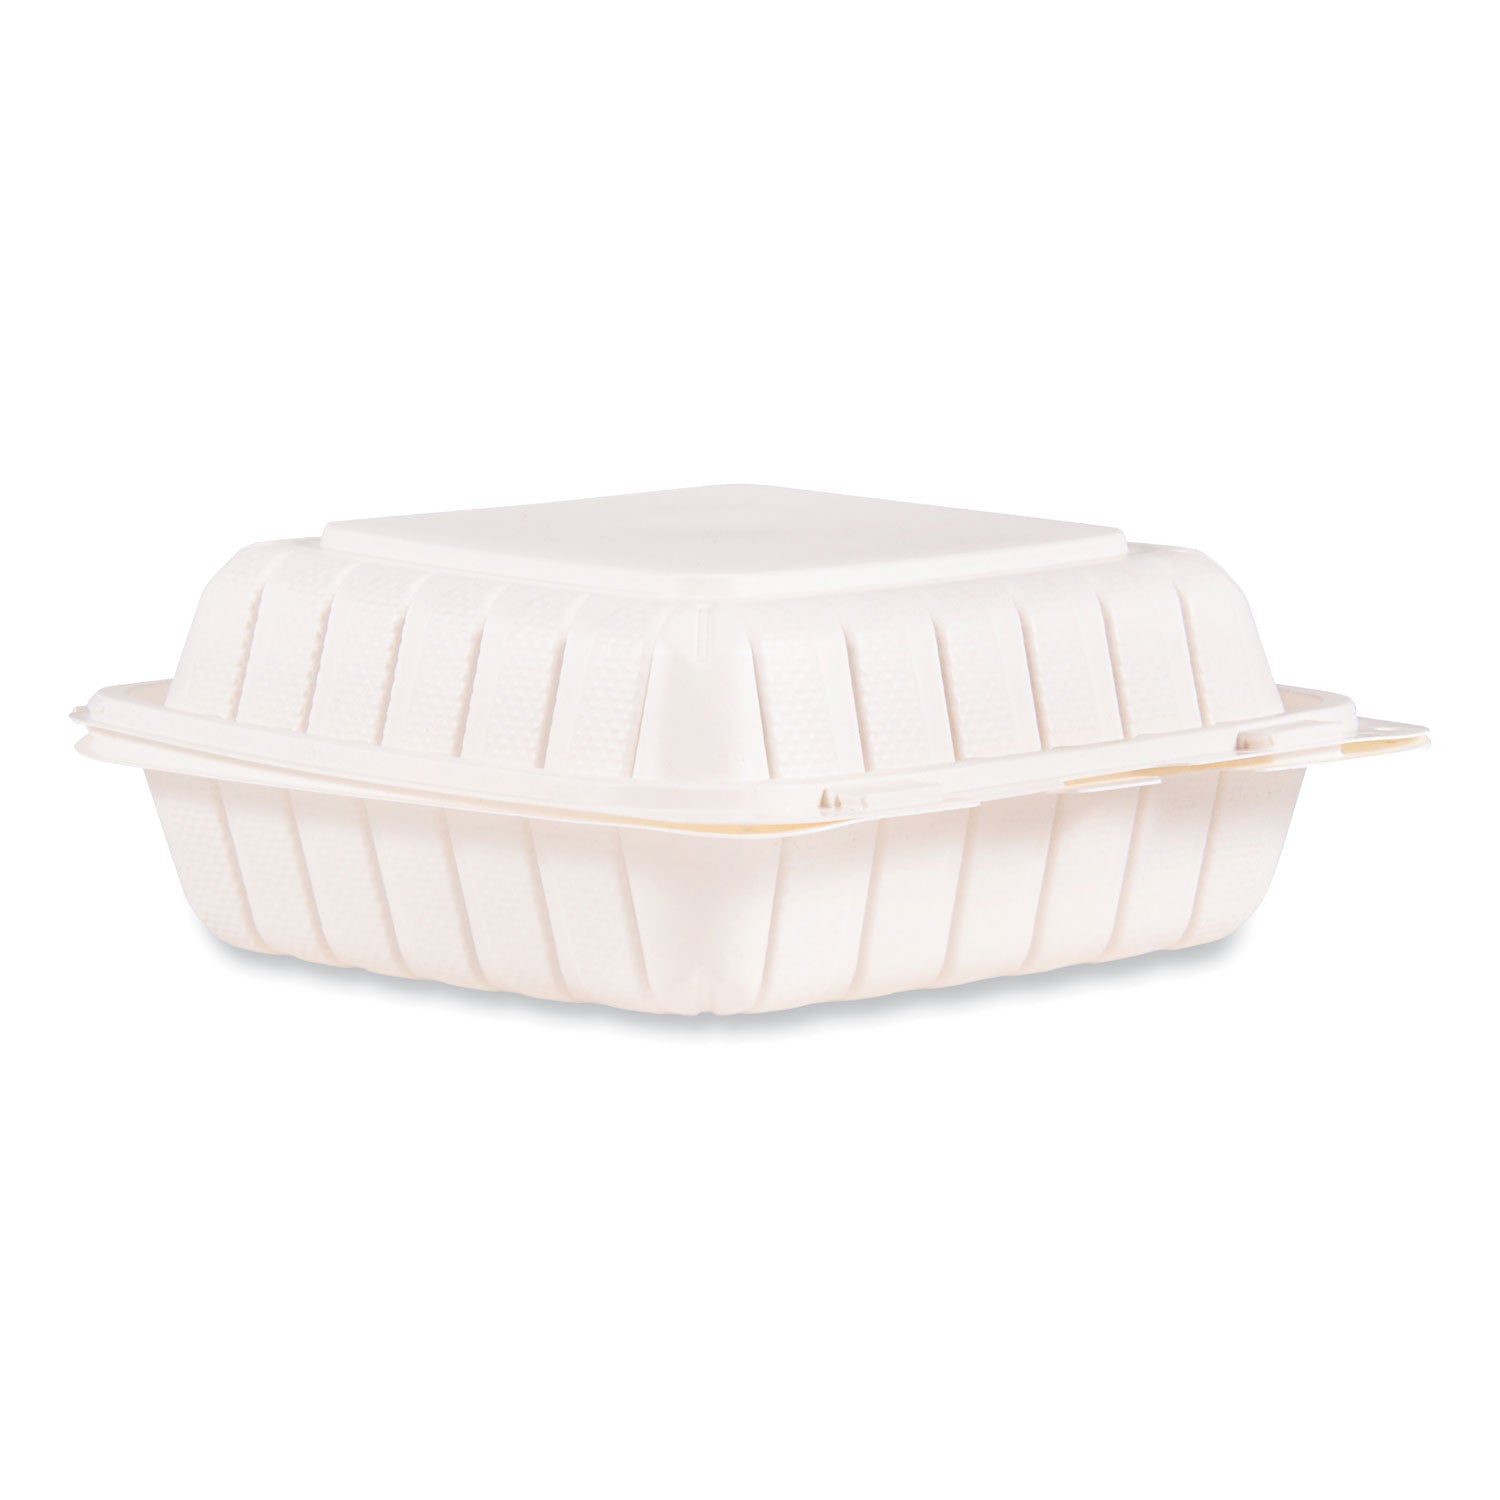 hinged-lid-containers-single-compartment-825-x-8-x-3-white-plastic-150-carton_dcc85mfppht1r - 1